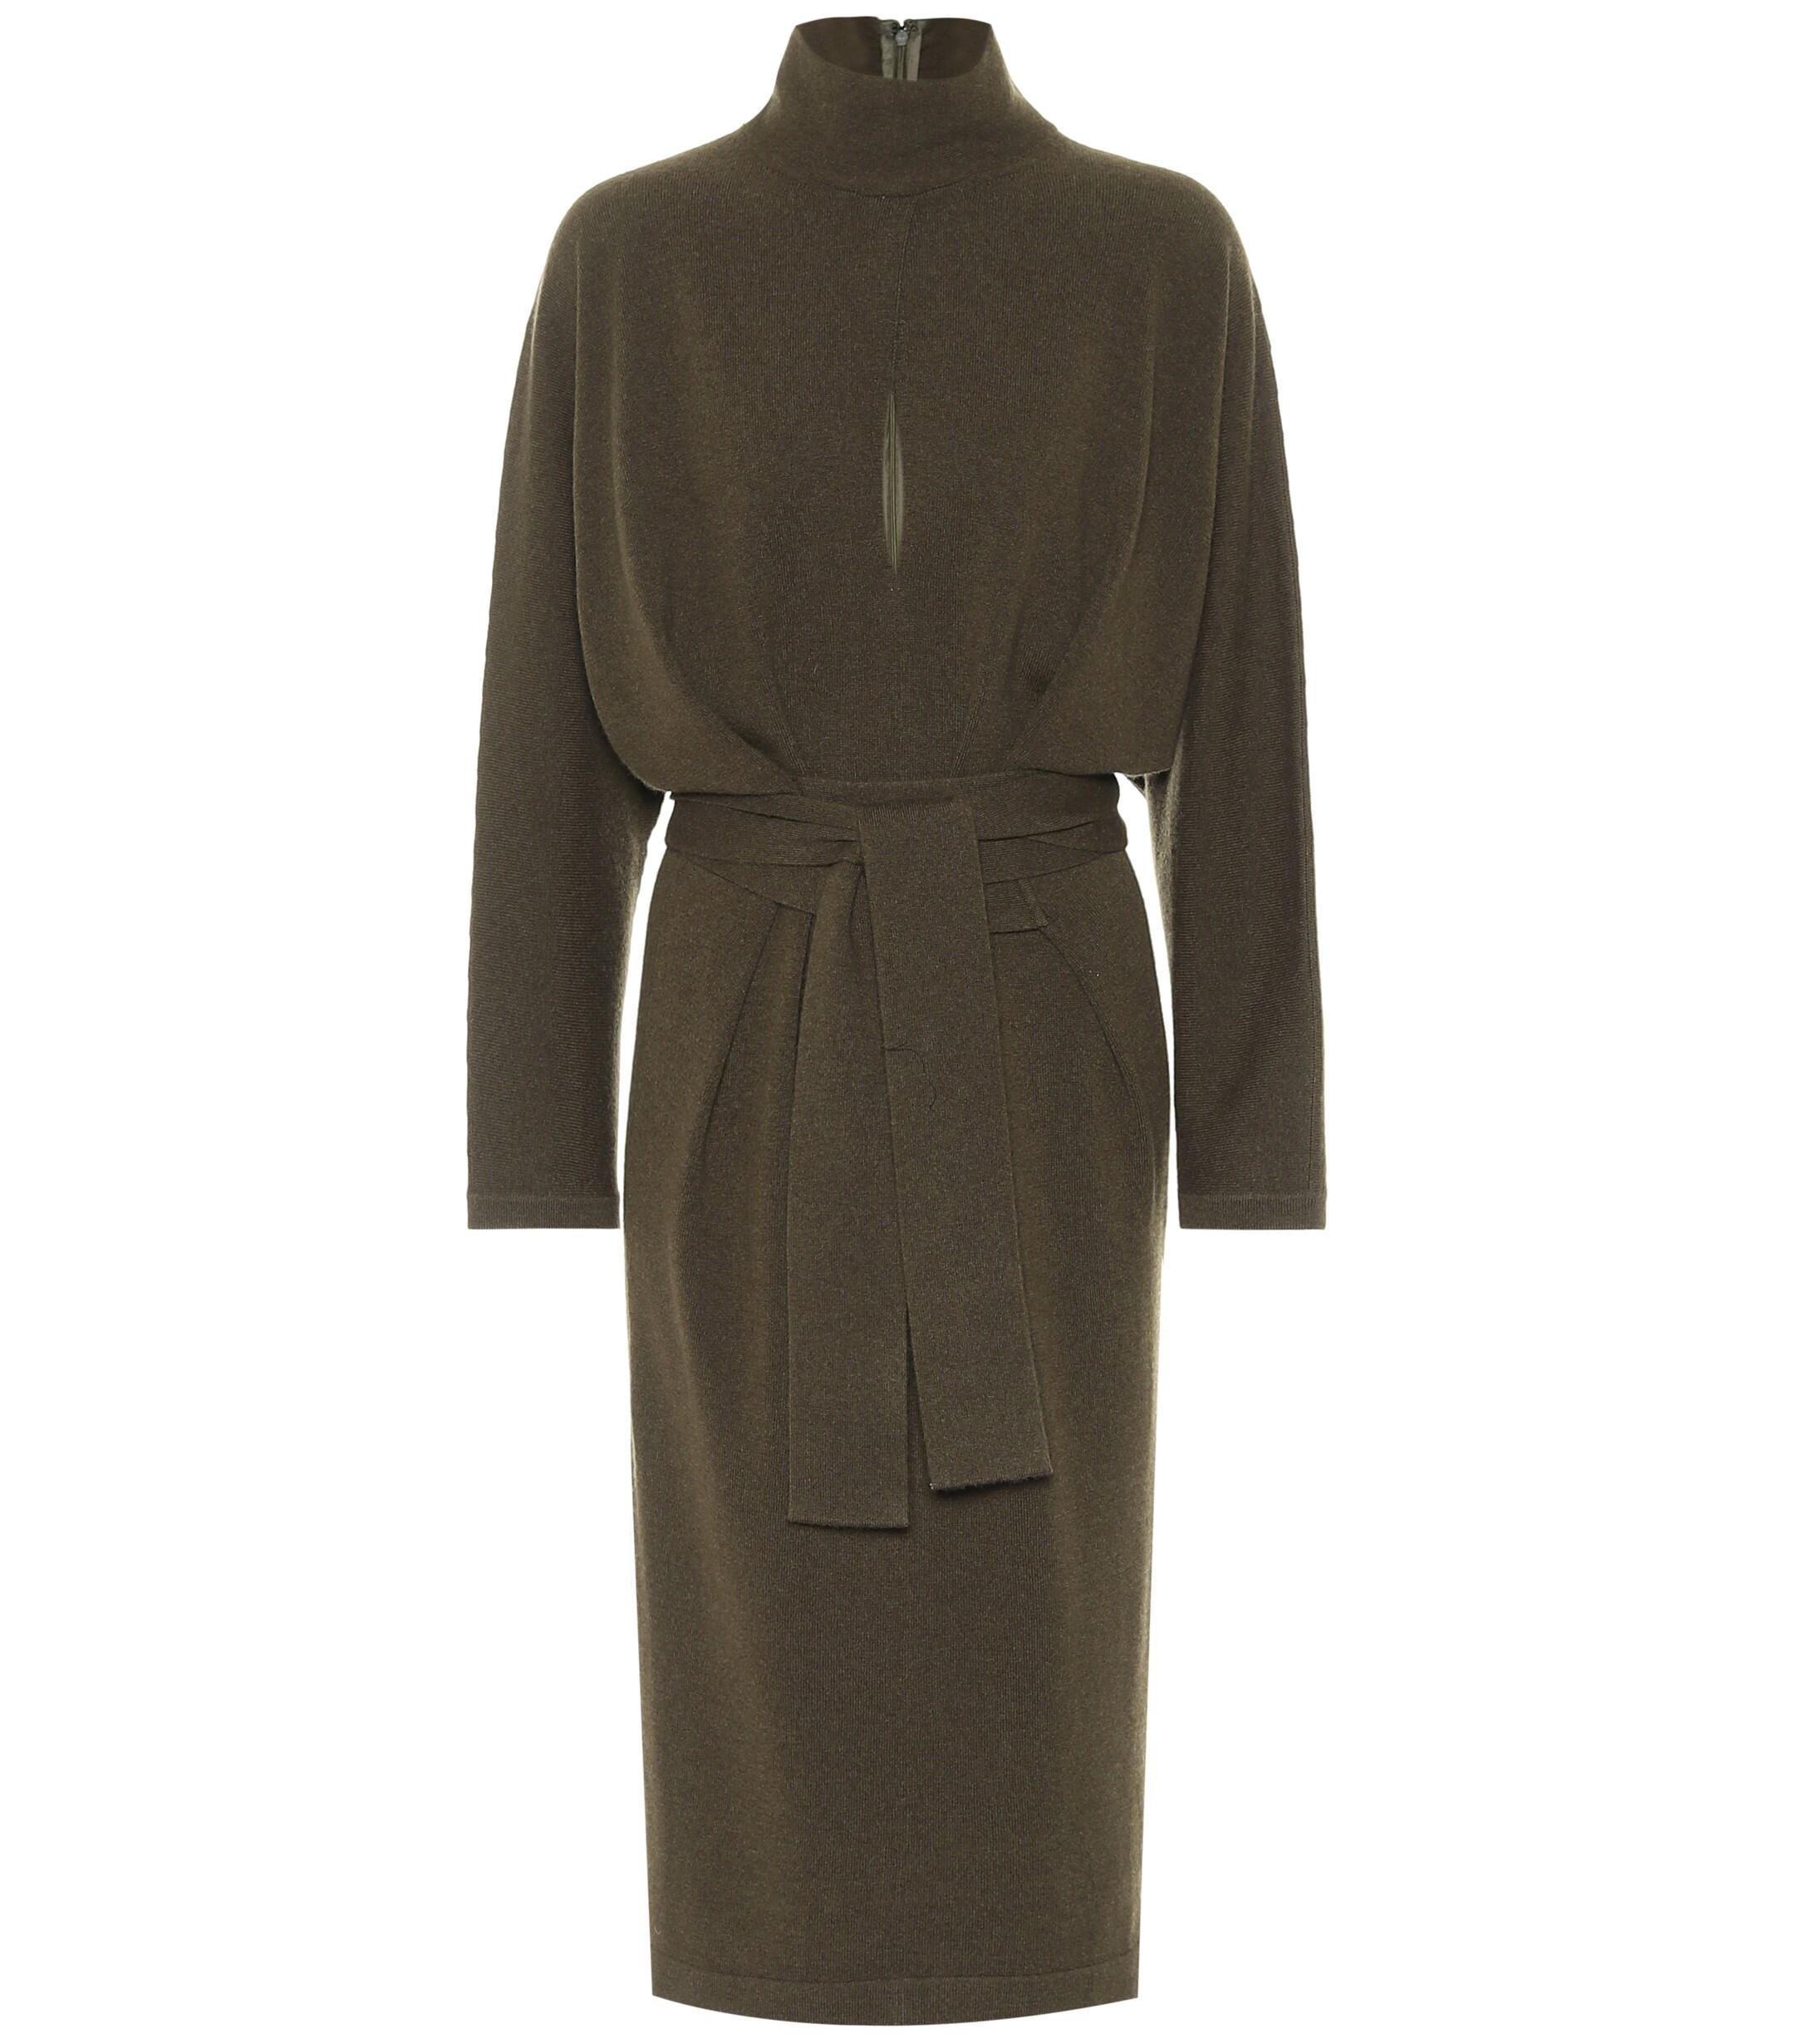 Tom Ford Belted Cashmere Sweater Dress in Green | Lyst UK